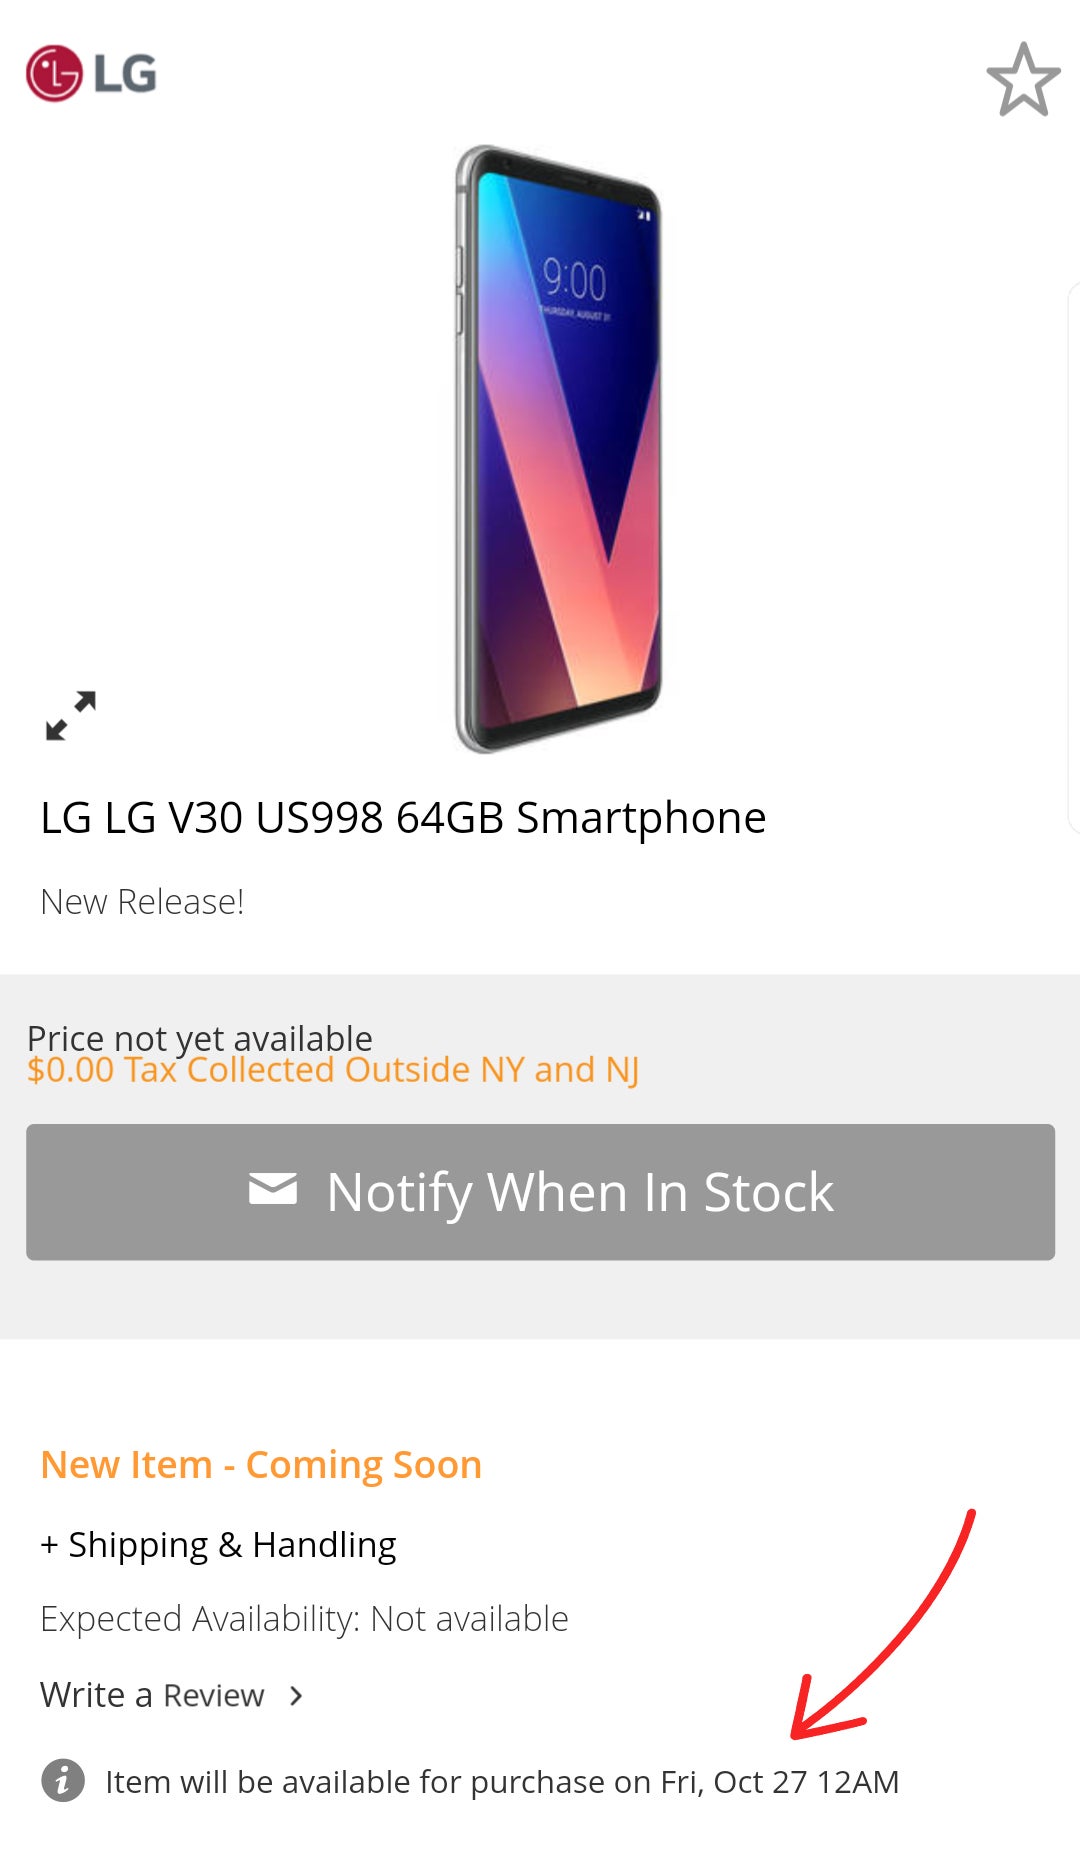 Holding out for an unlocked LG V30 in the US? You'll probably have to wait a bit longer